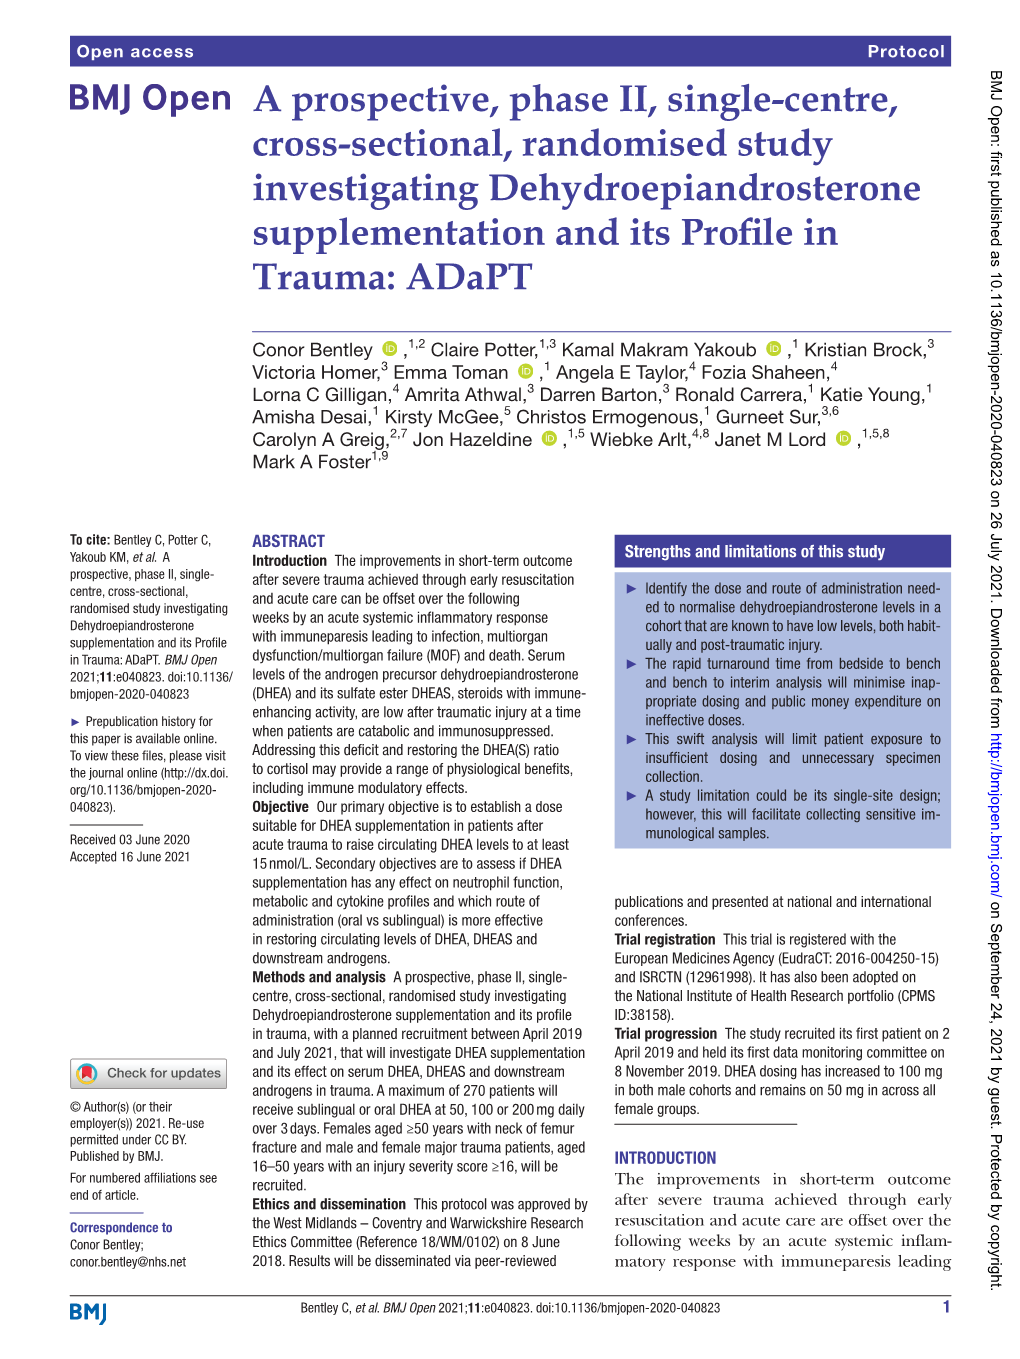 Sectional, Randomised Study Investigating Dehydroepiandrosterone Supplementation and Its Profile in Trauma: Adapt